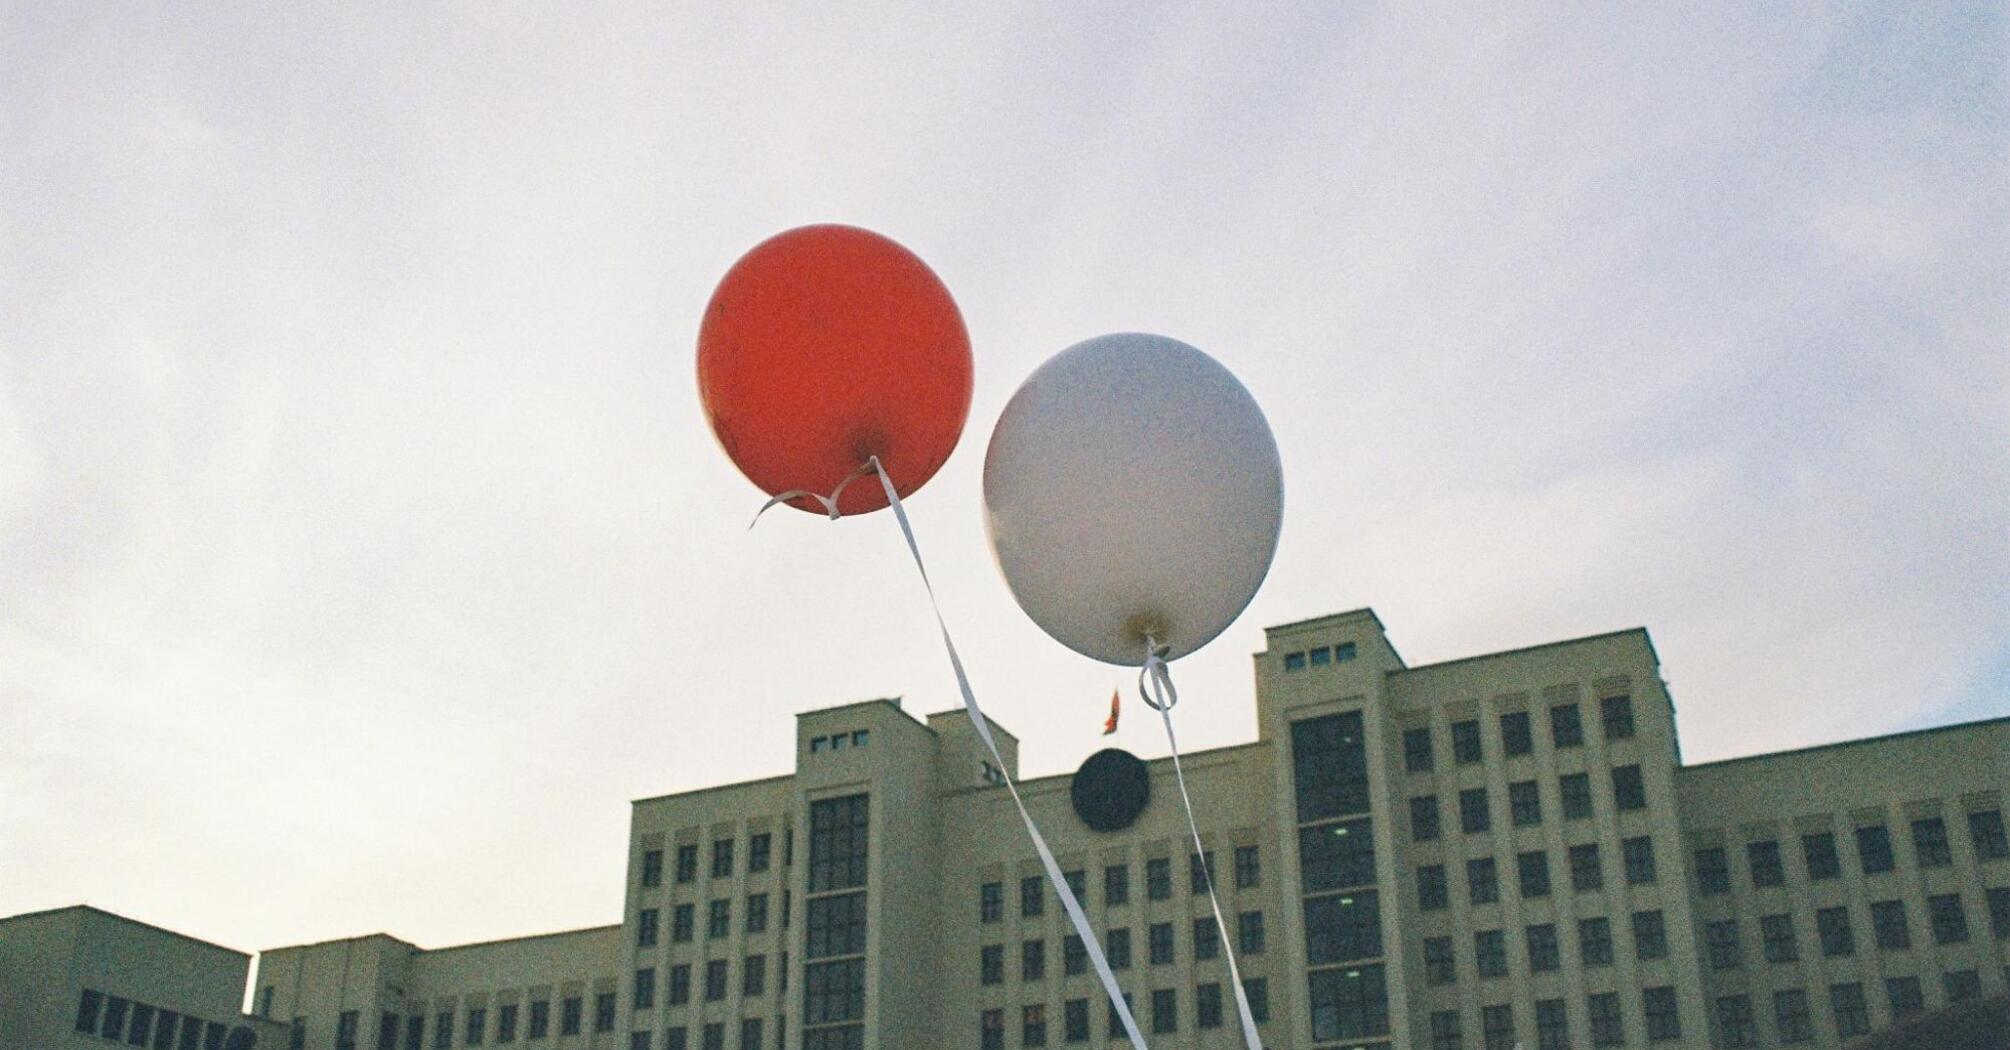 Baloons flying in the sky in front of old building